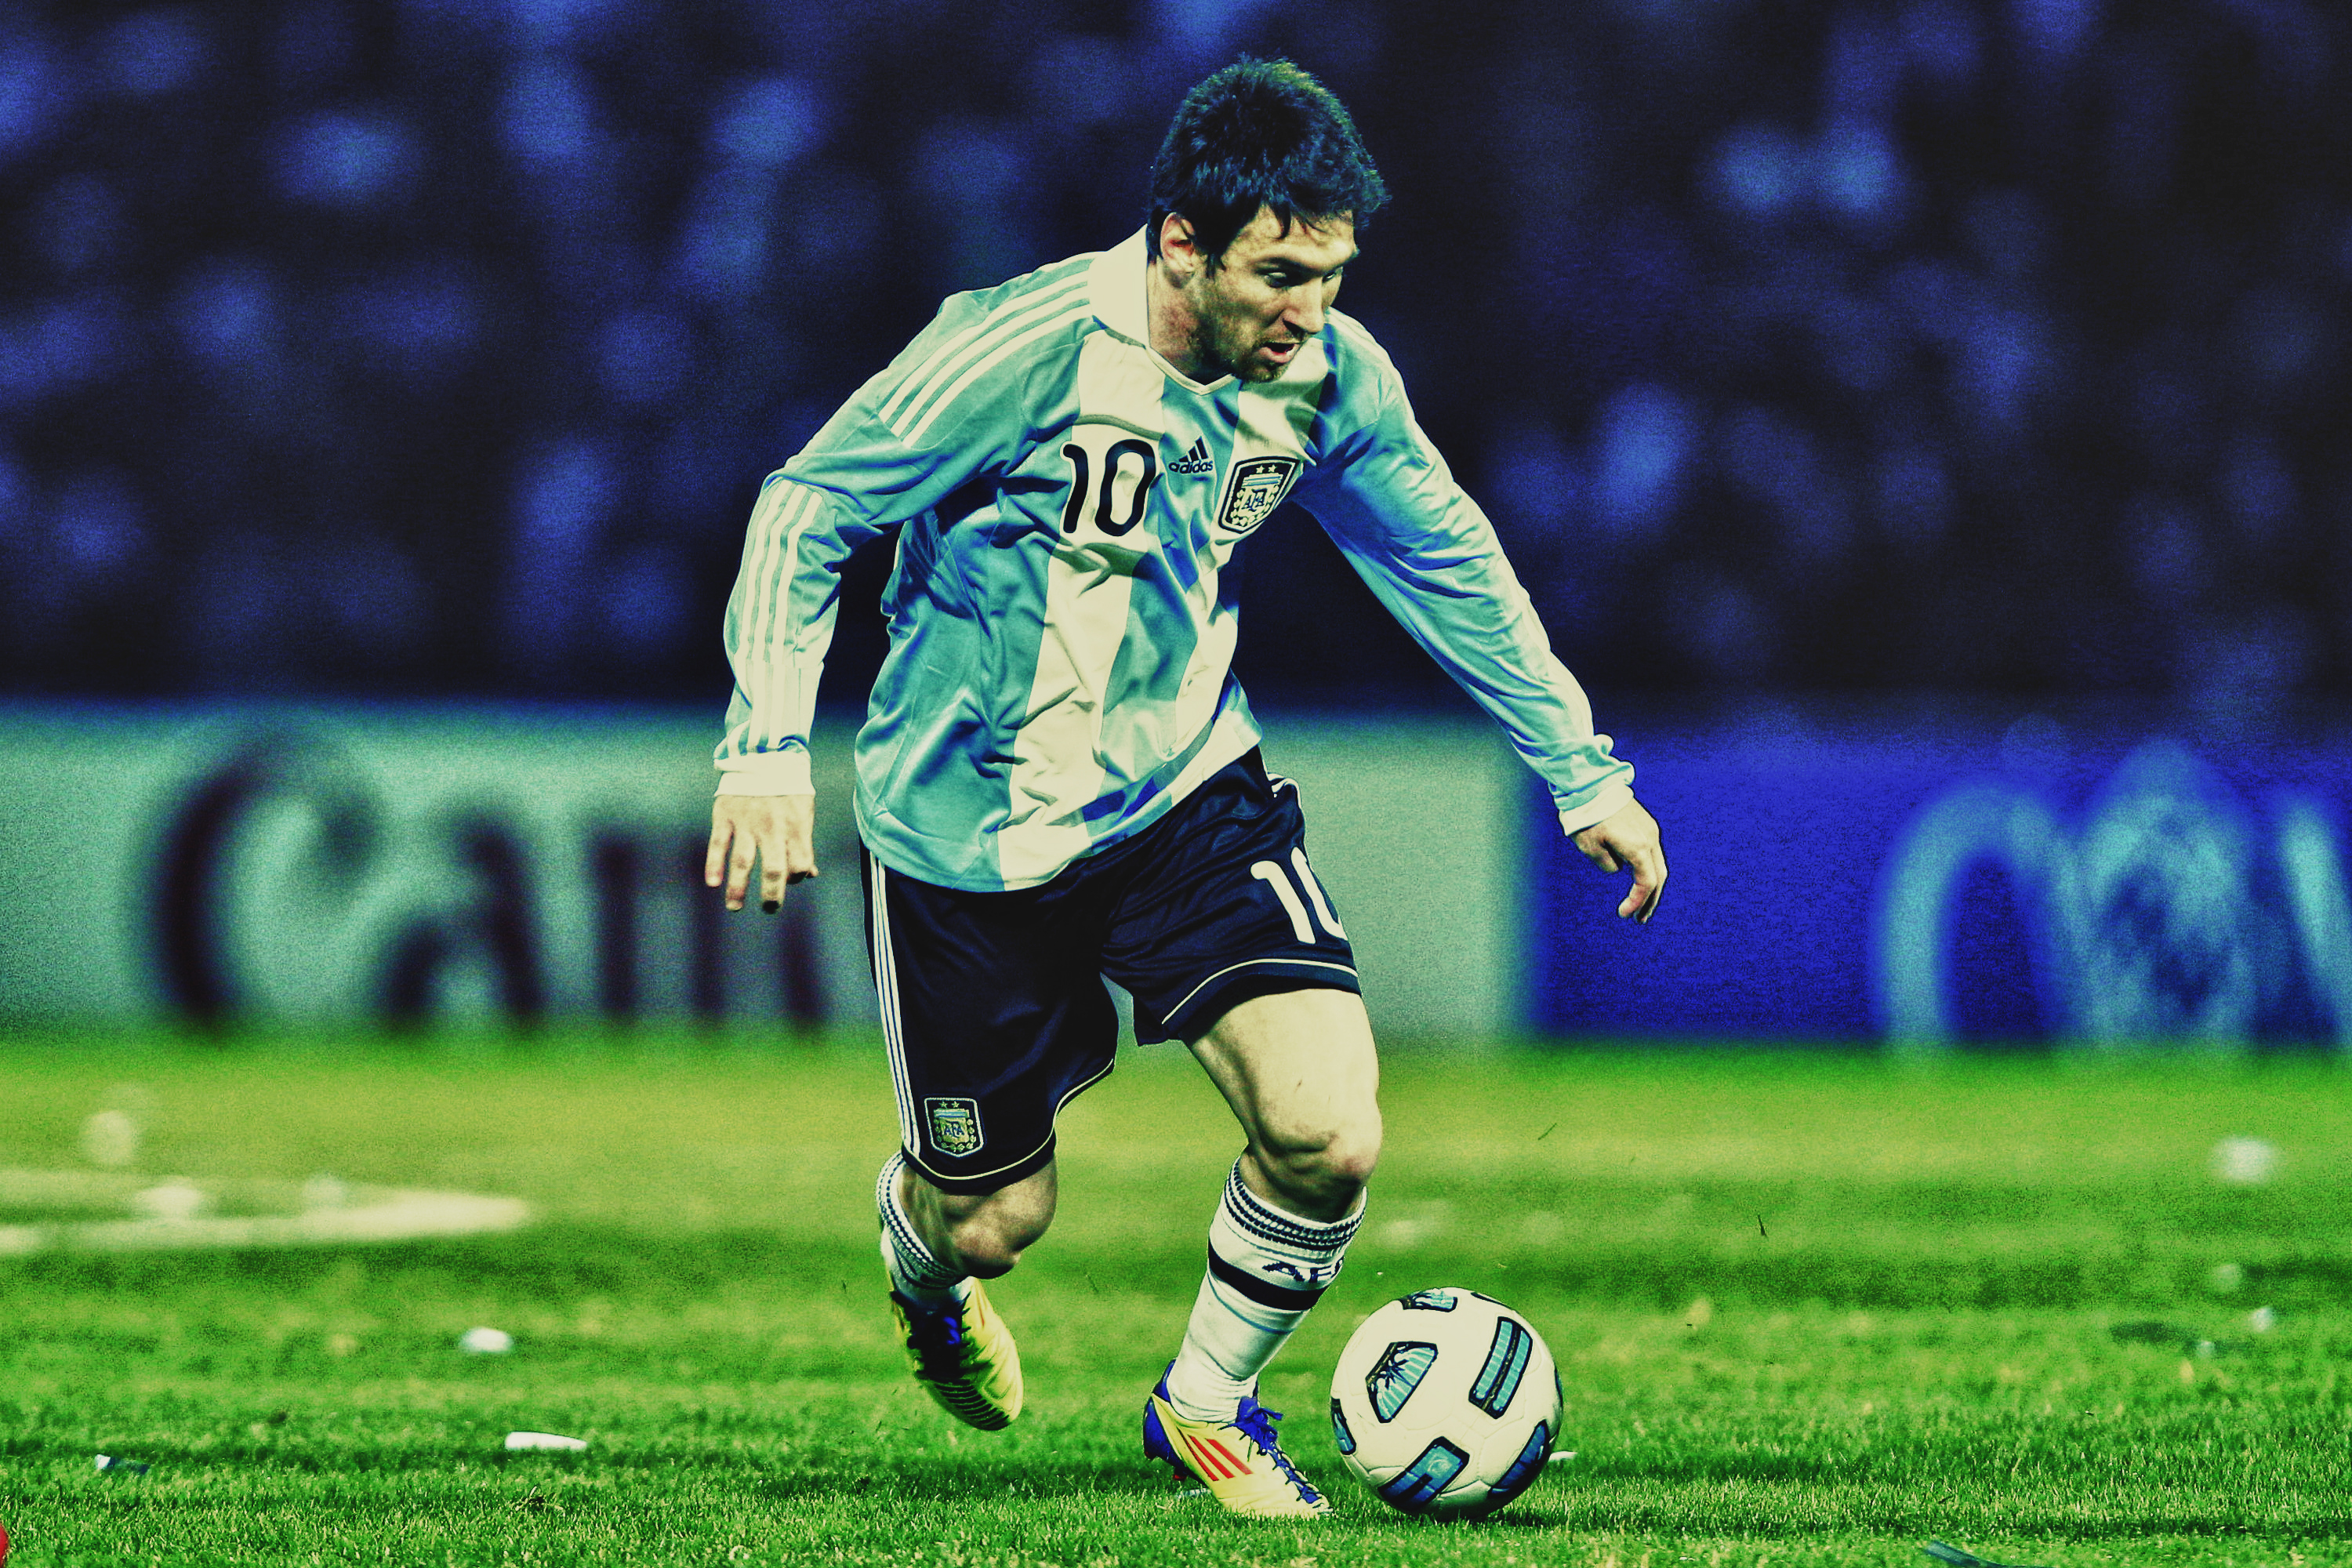 Lionel Messi Wallpapers, Pictures, Images